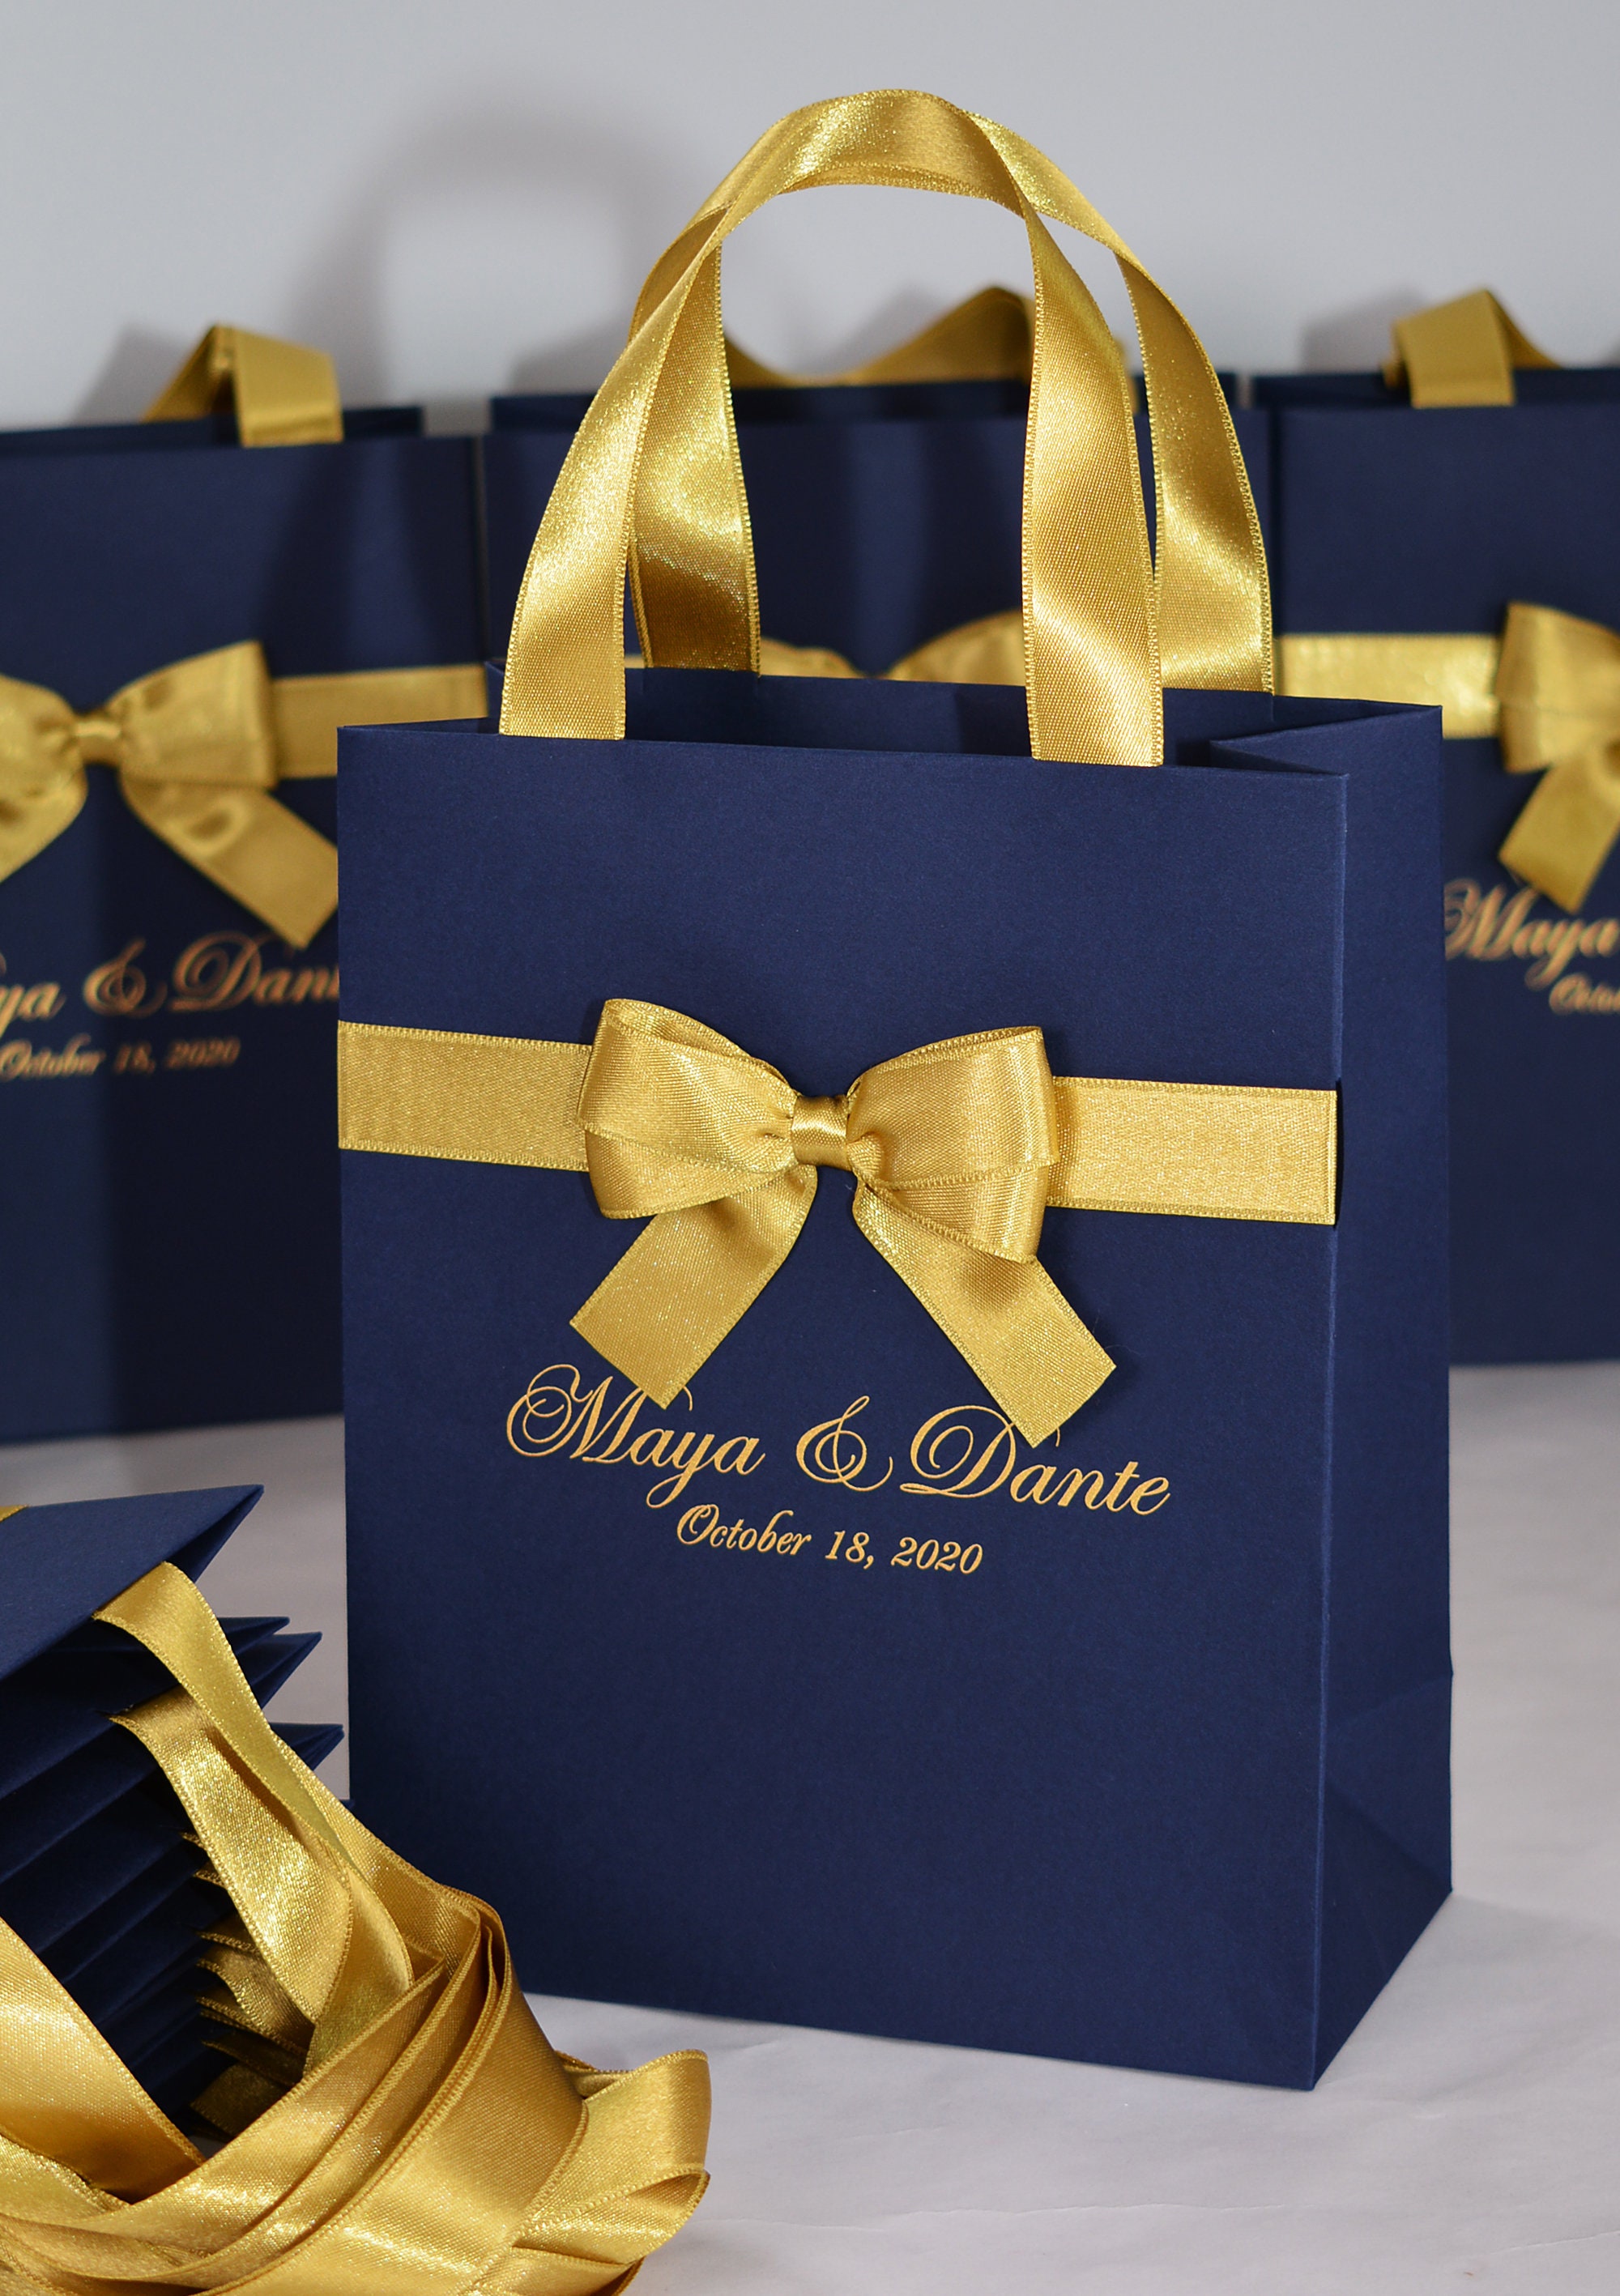  25 Pack Wedding Gift Bag with Tissue Paper and Ribbons - Gold  Wedding Gift Bags for Hotel Guests, Wedding Welcome Bag, Wedding Thank You  Bags with Handles Bulk Medium Size (8L